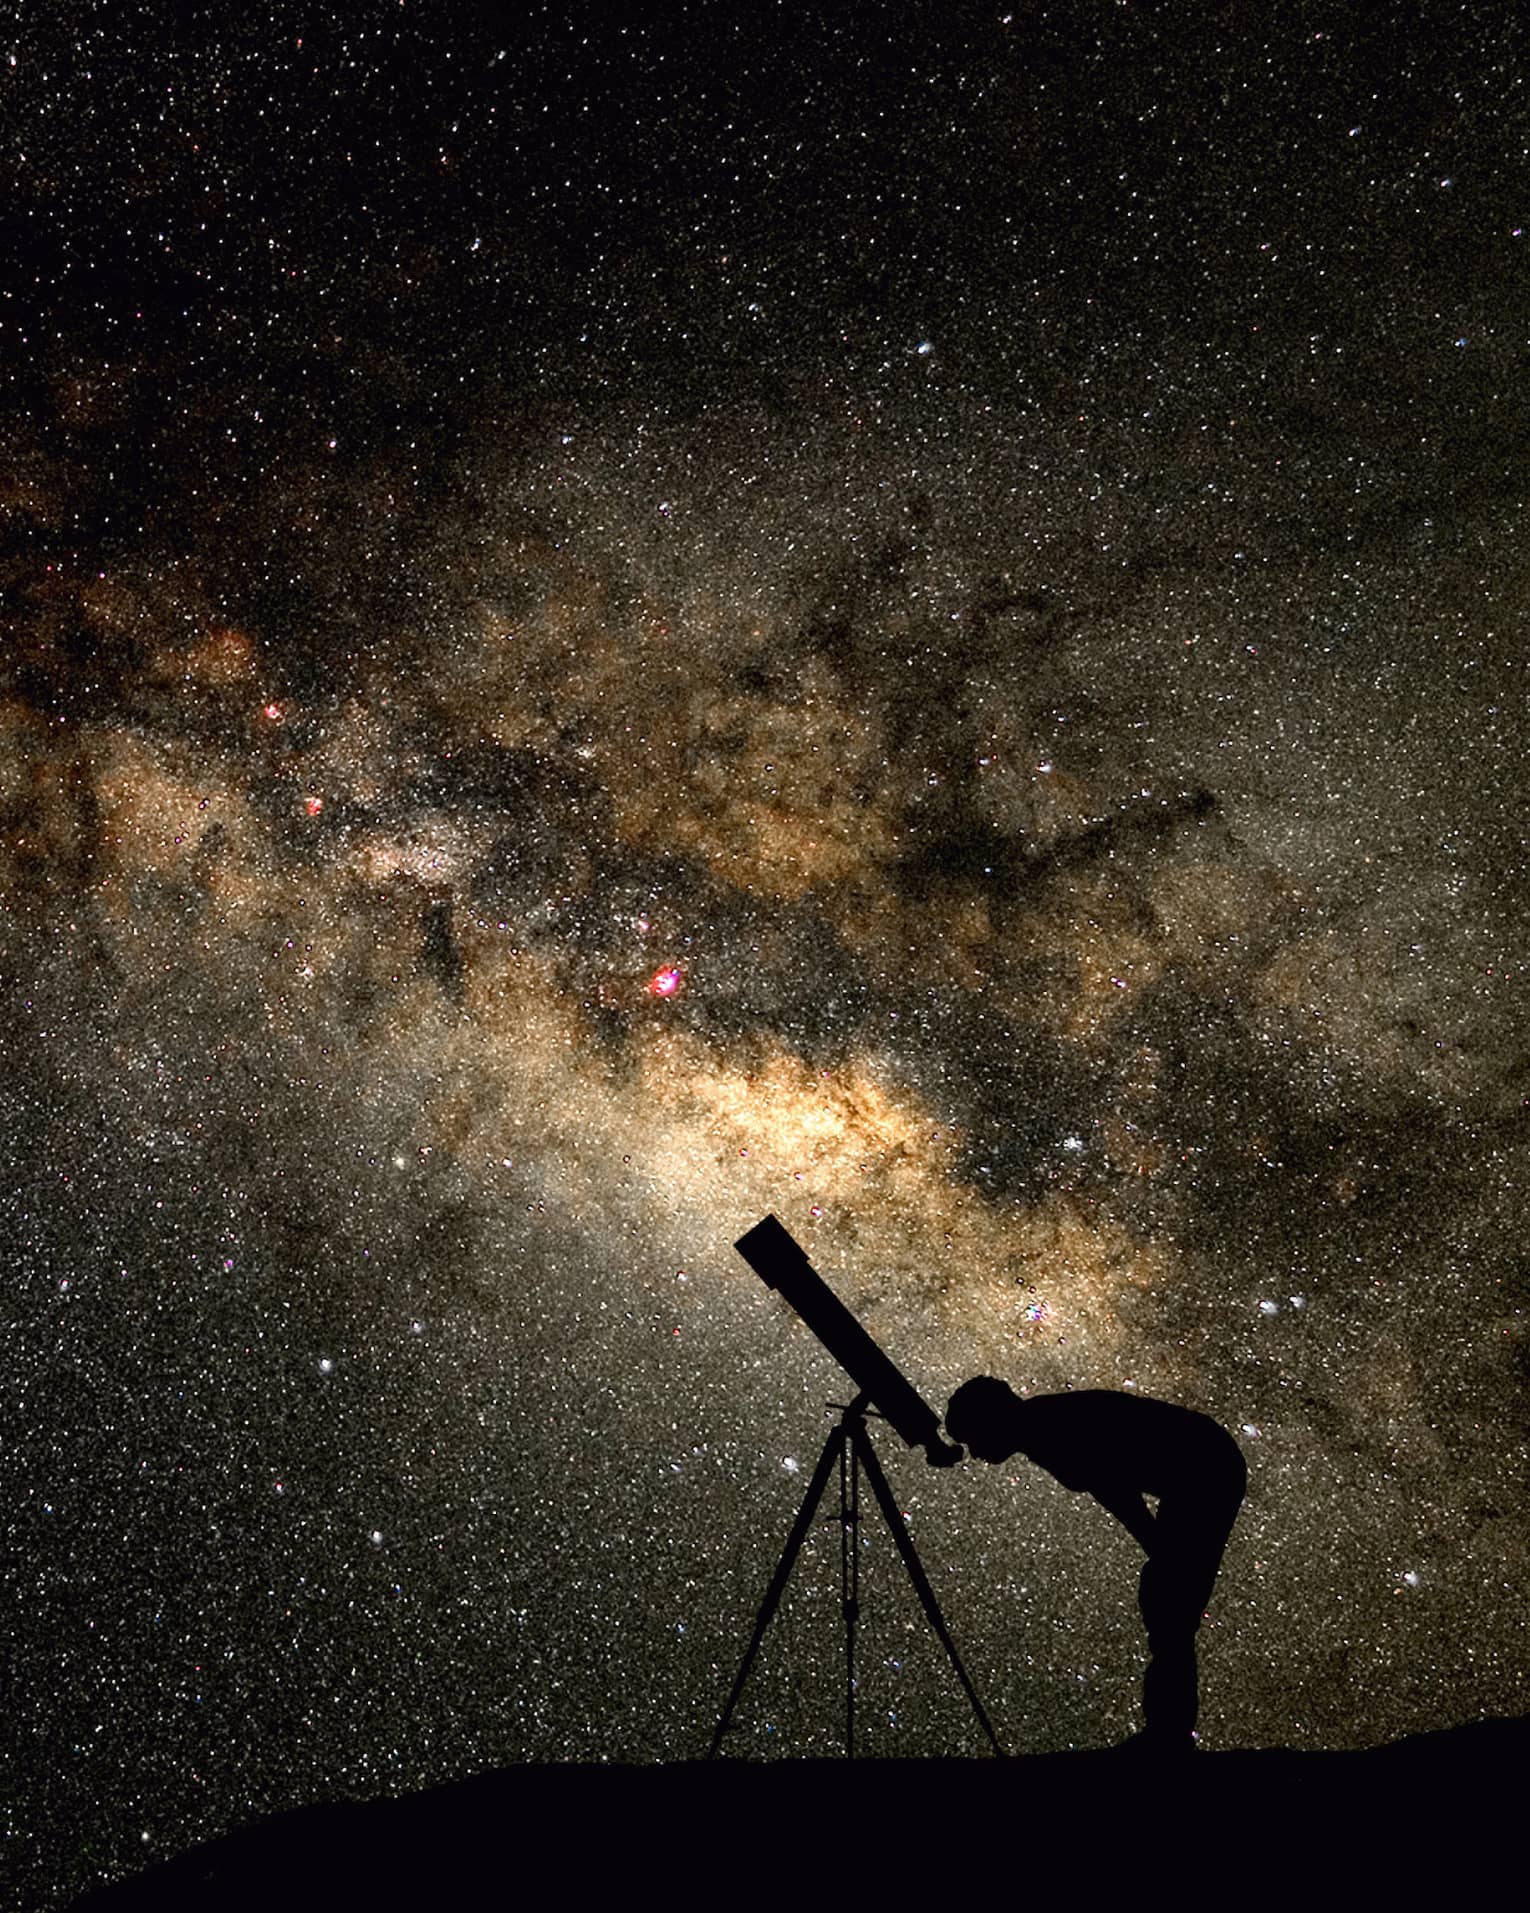 Silhouette of stargazer leaning into telescope against a starry sky, milky way